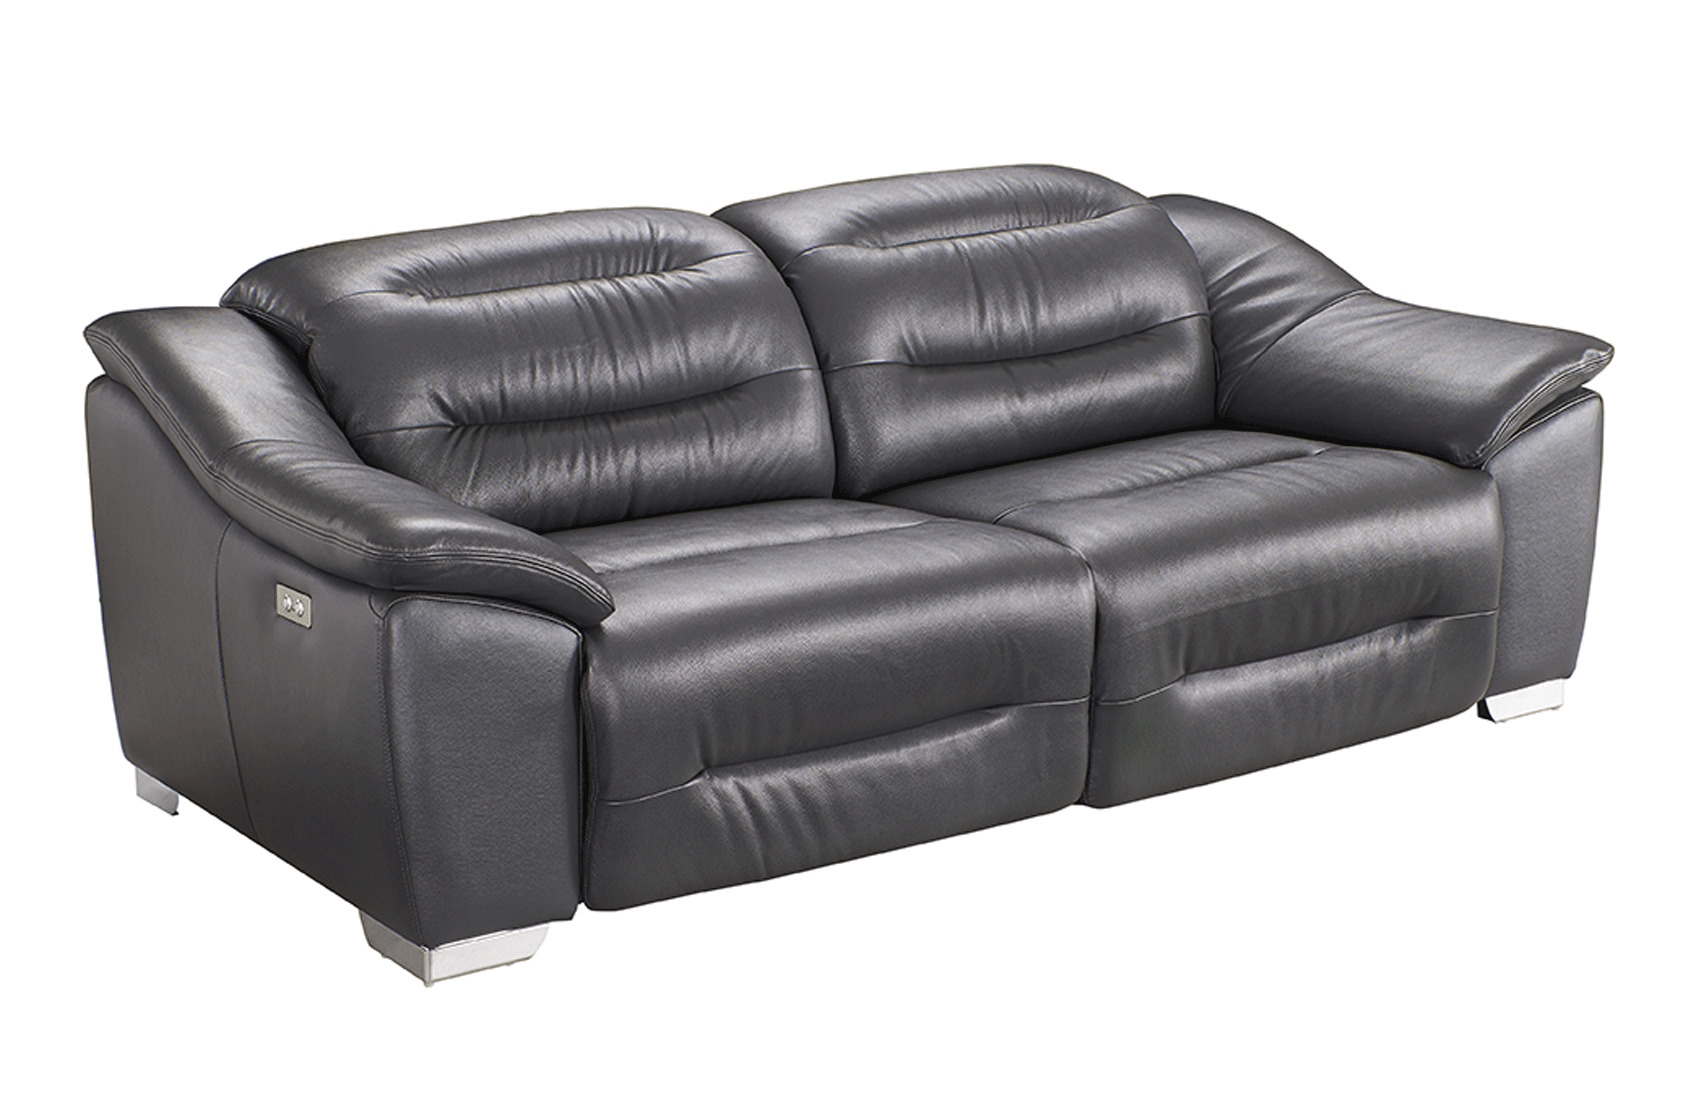 Contemporary Leather Grey Living Room Set